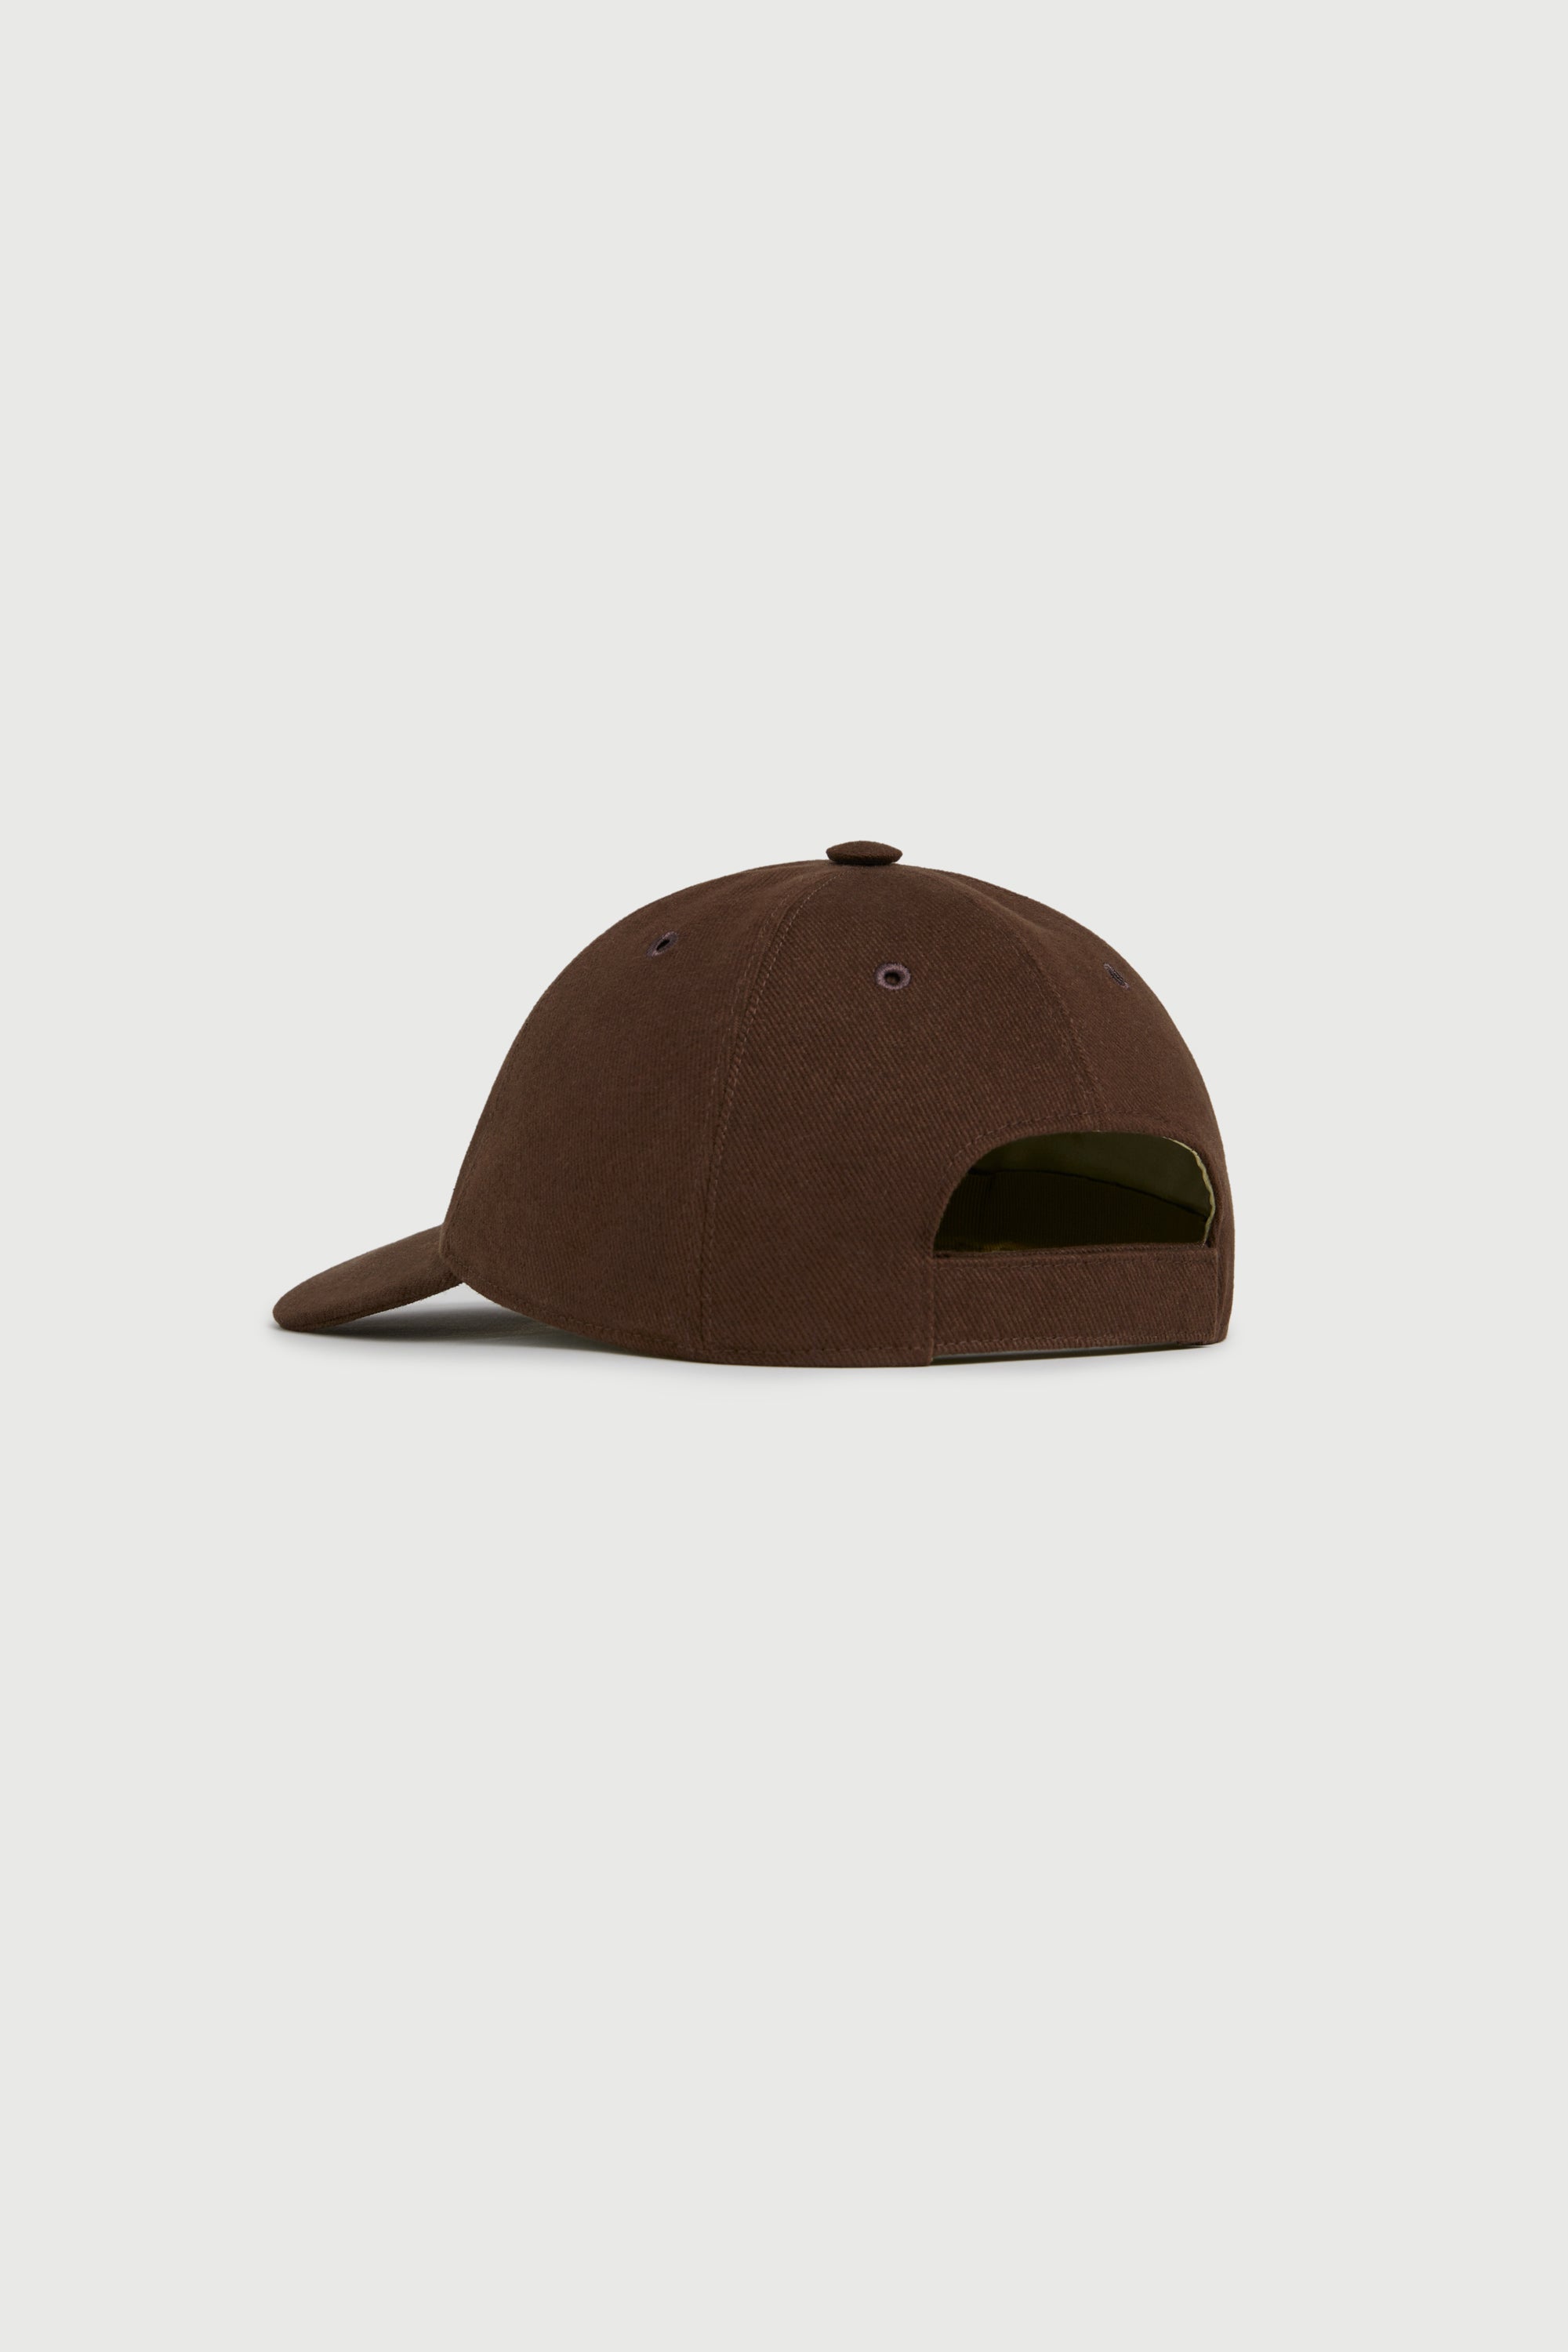 back, The Silk-Lined Baseball Cap in Brown, with embroidered logo, Comme Si